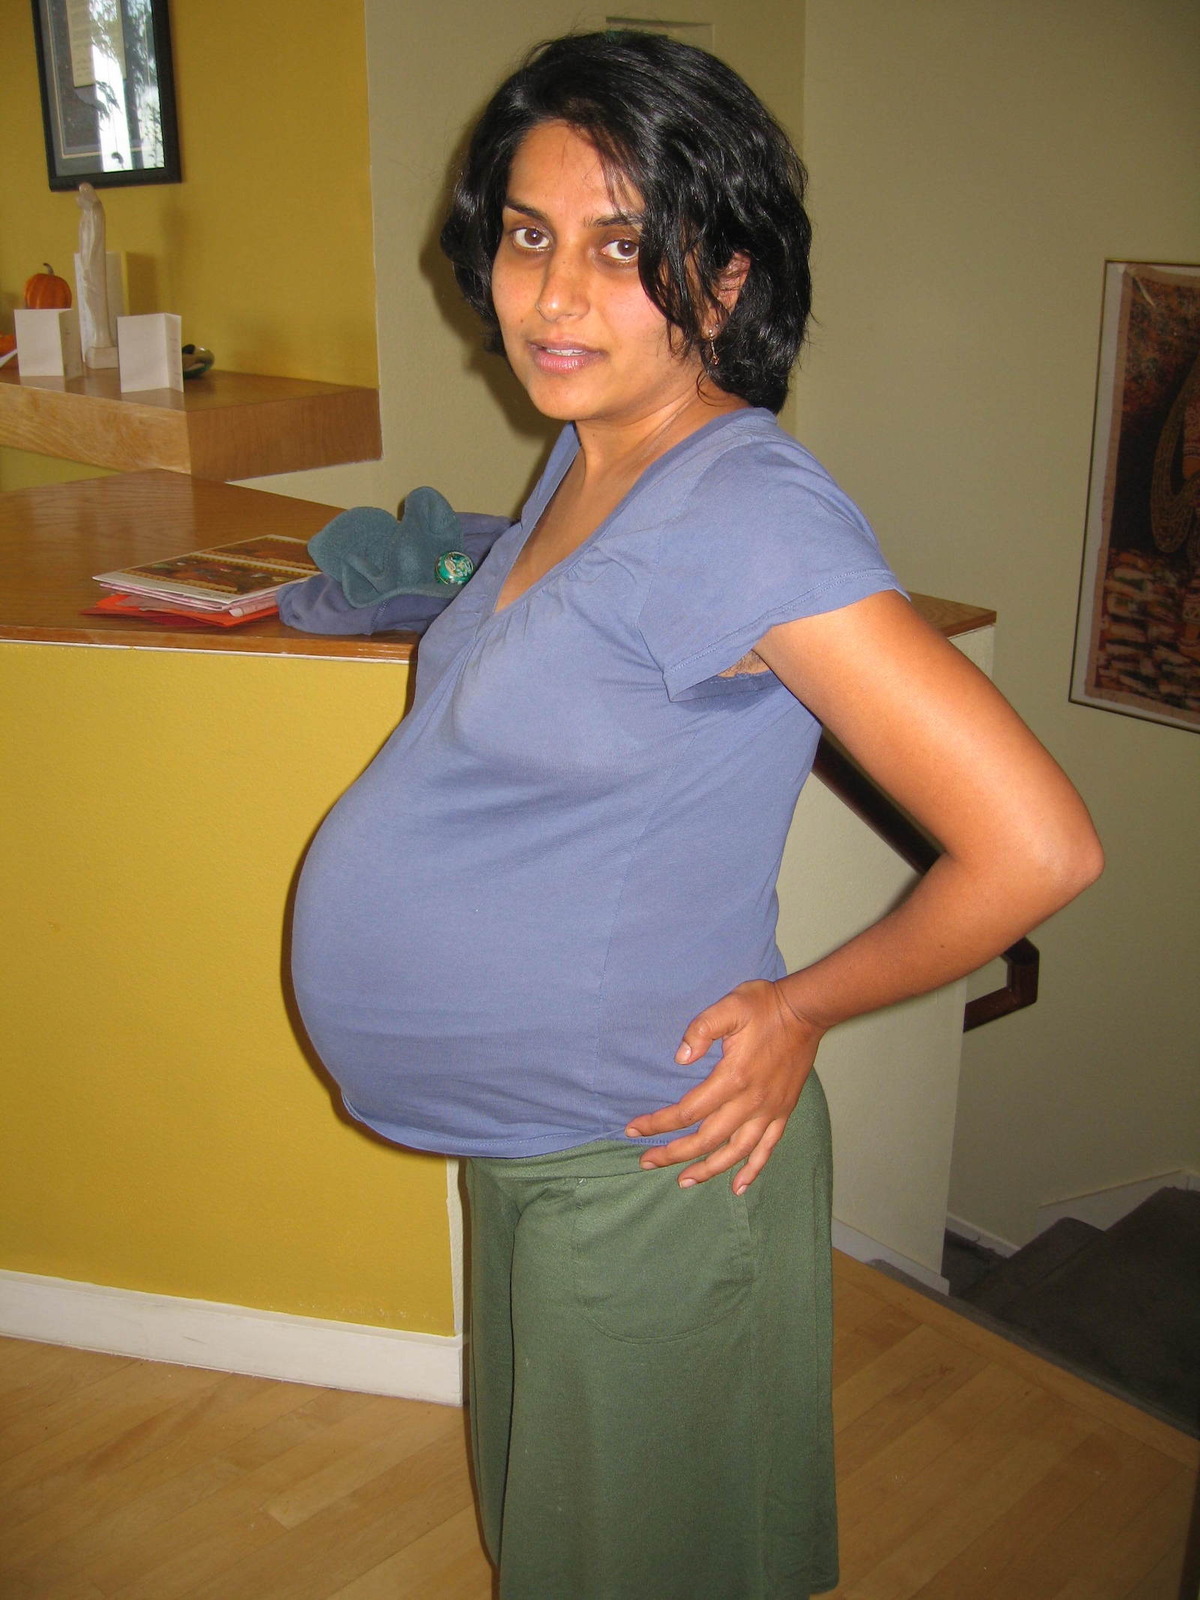 A pregnant woman poses for a photo.